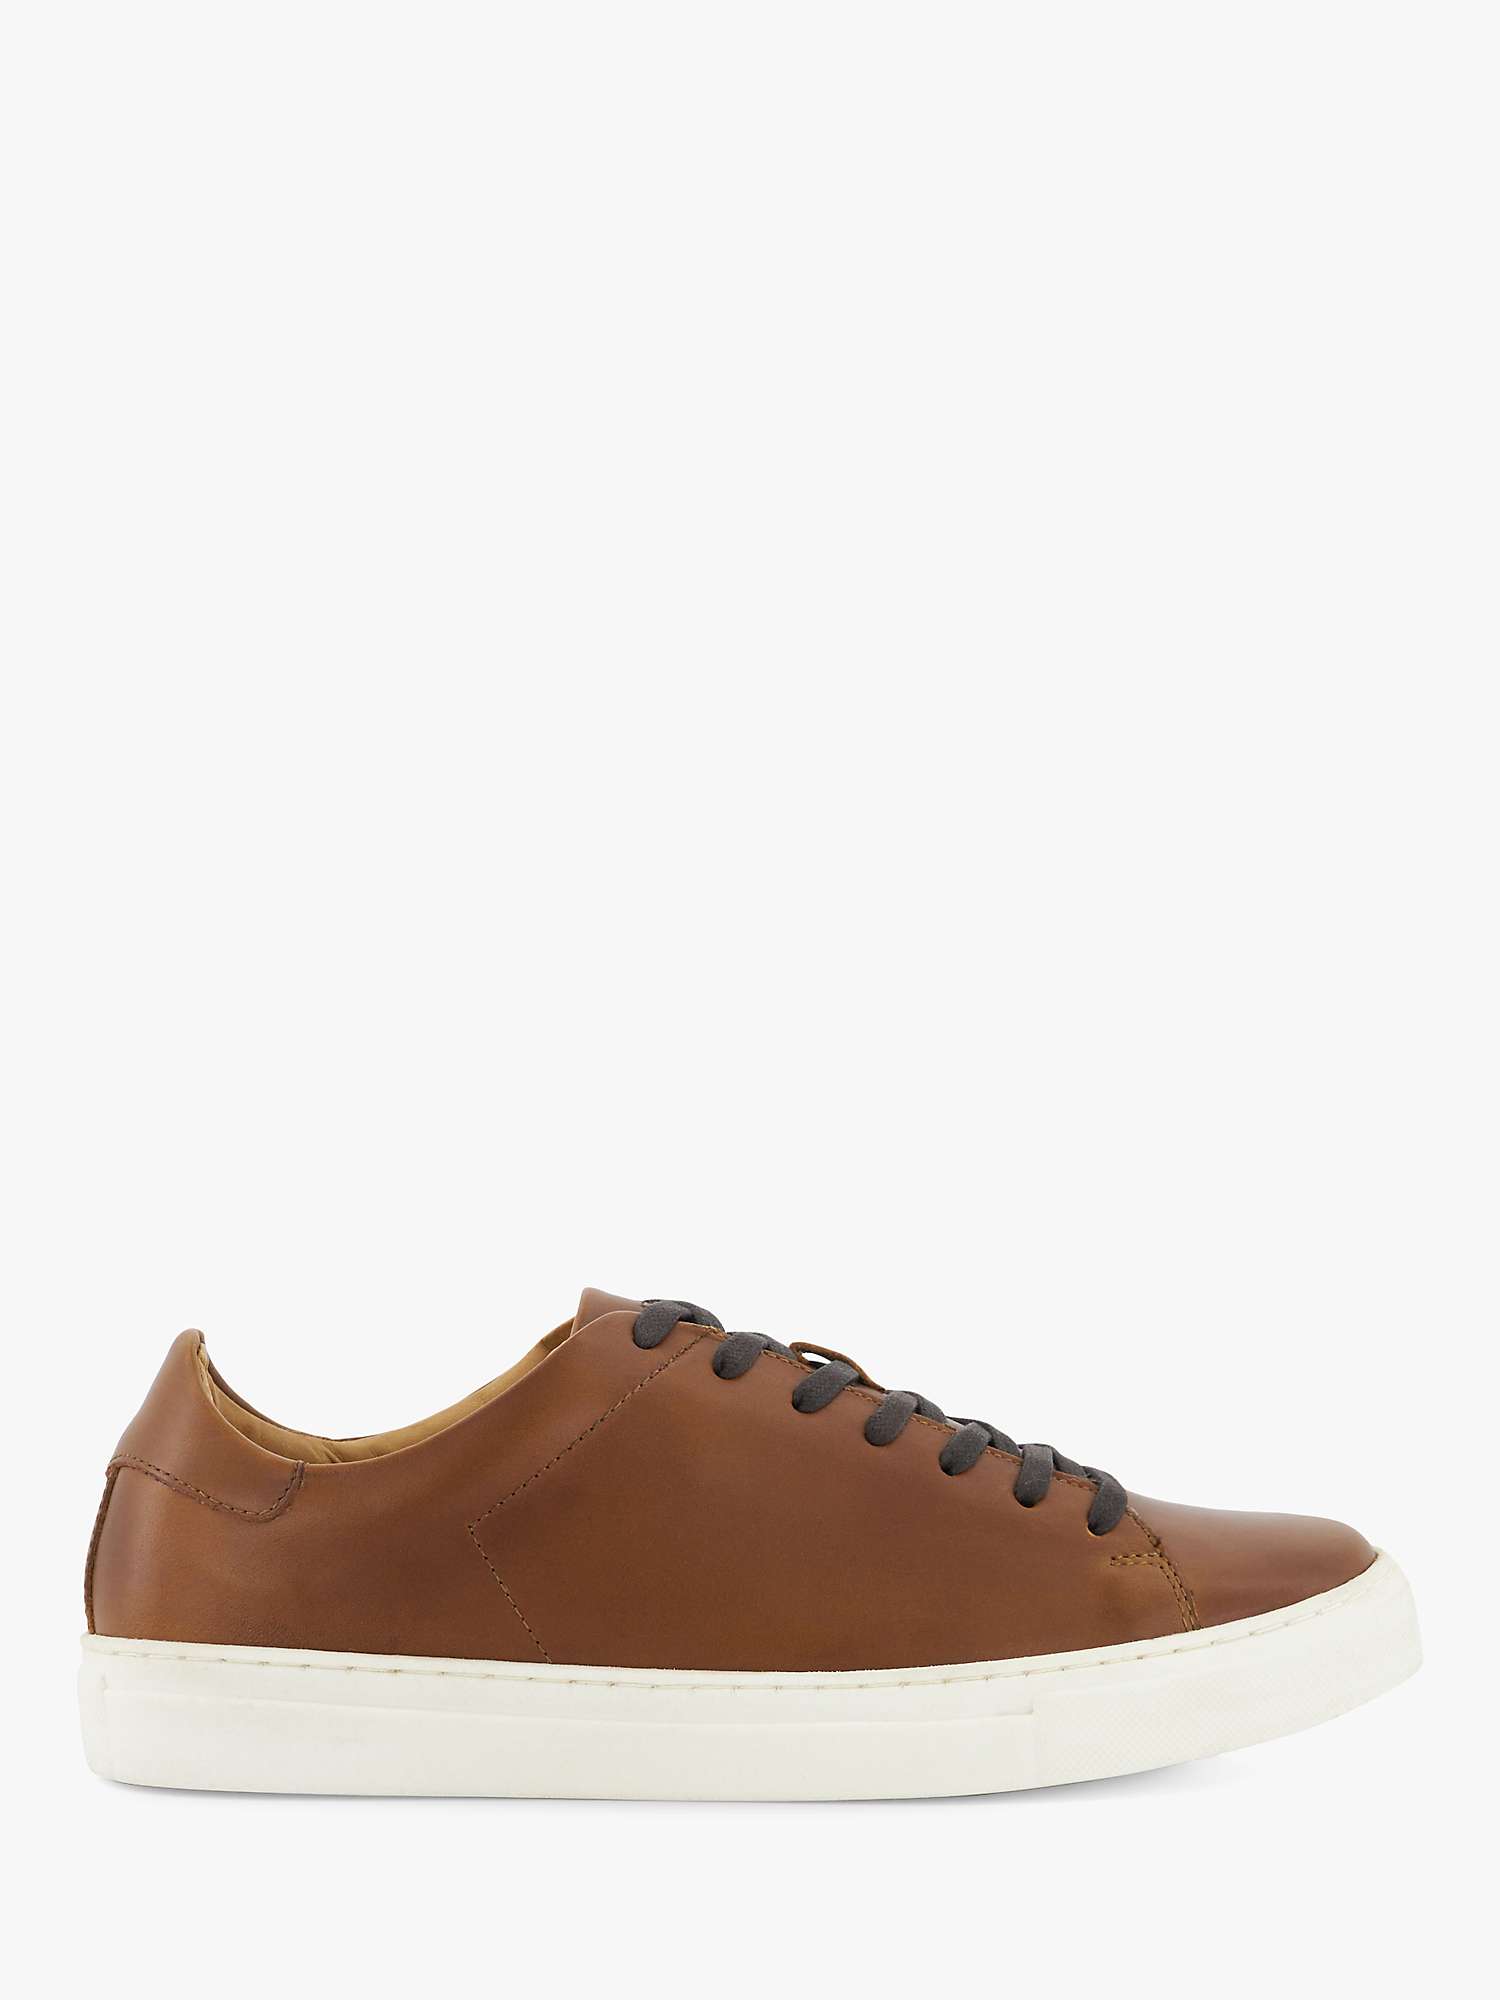 Dune Terrence Leather Lace Up Cup-Sole Trainers, Tan at John Lewis ...